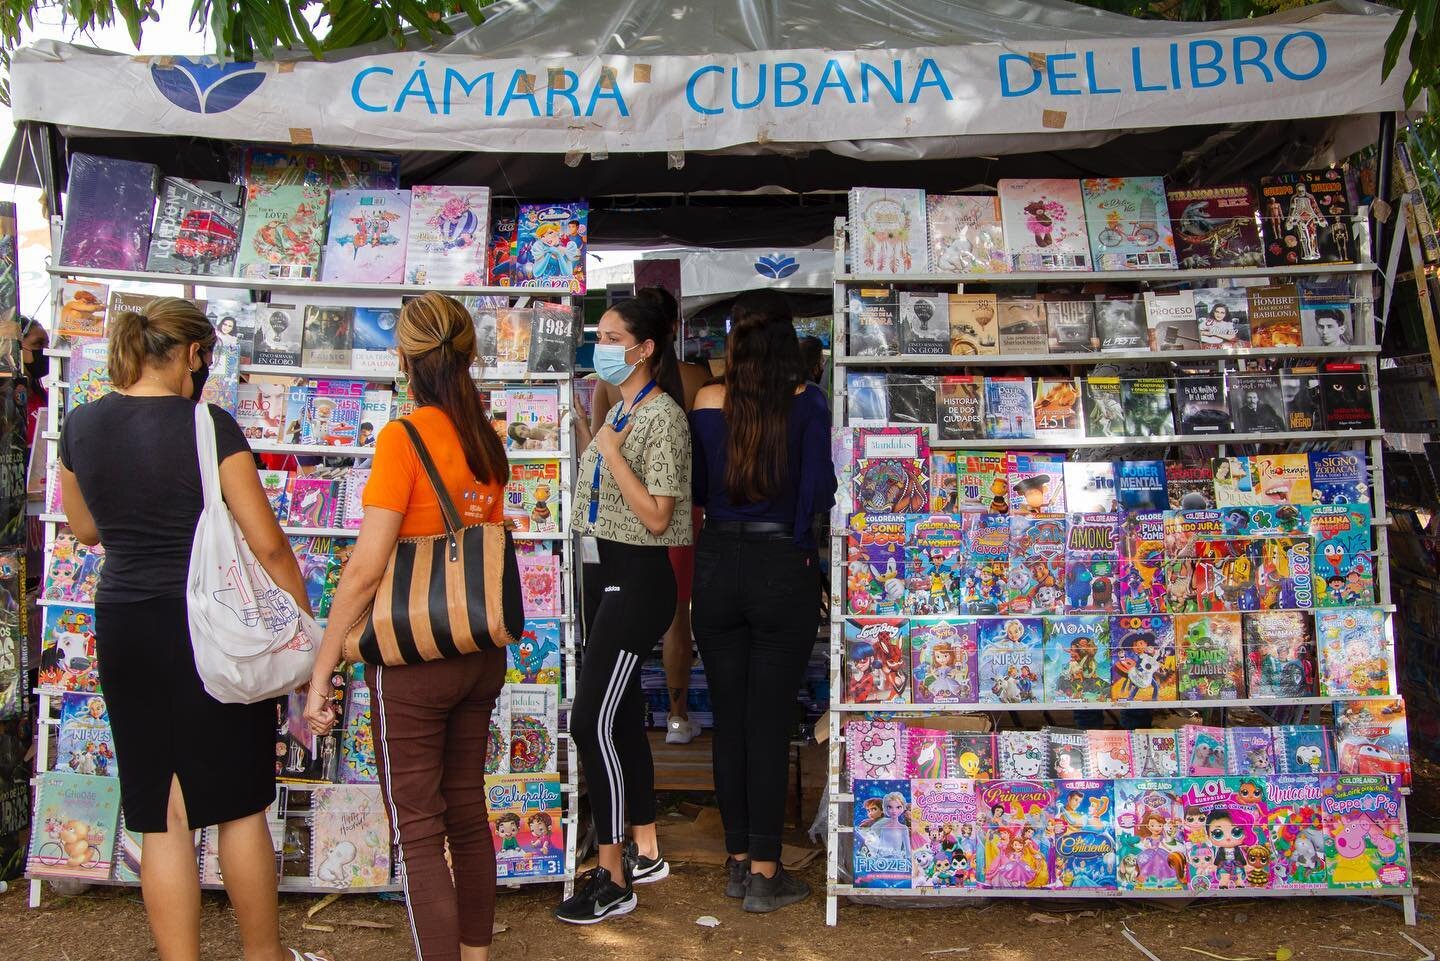 Our Communications Consultant @dolis_alf was able to catch a glimpse of  one of our favorite annual events yesterday, the 30th Havana International Book Fair.

It's the first time in 2 years, since COVID, for the fair to take place. Until April 30, t